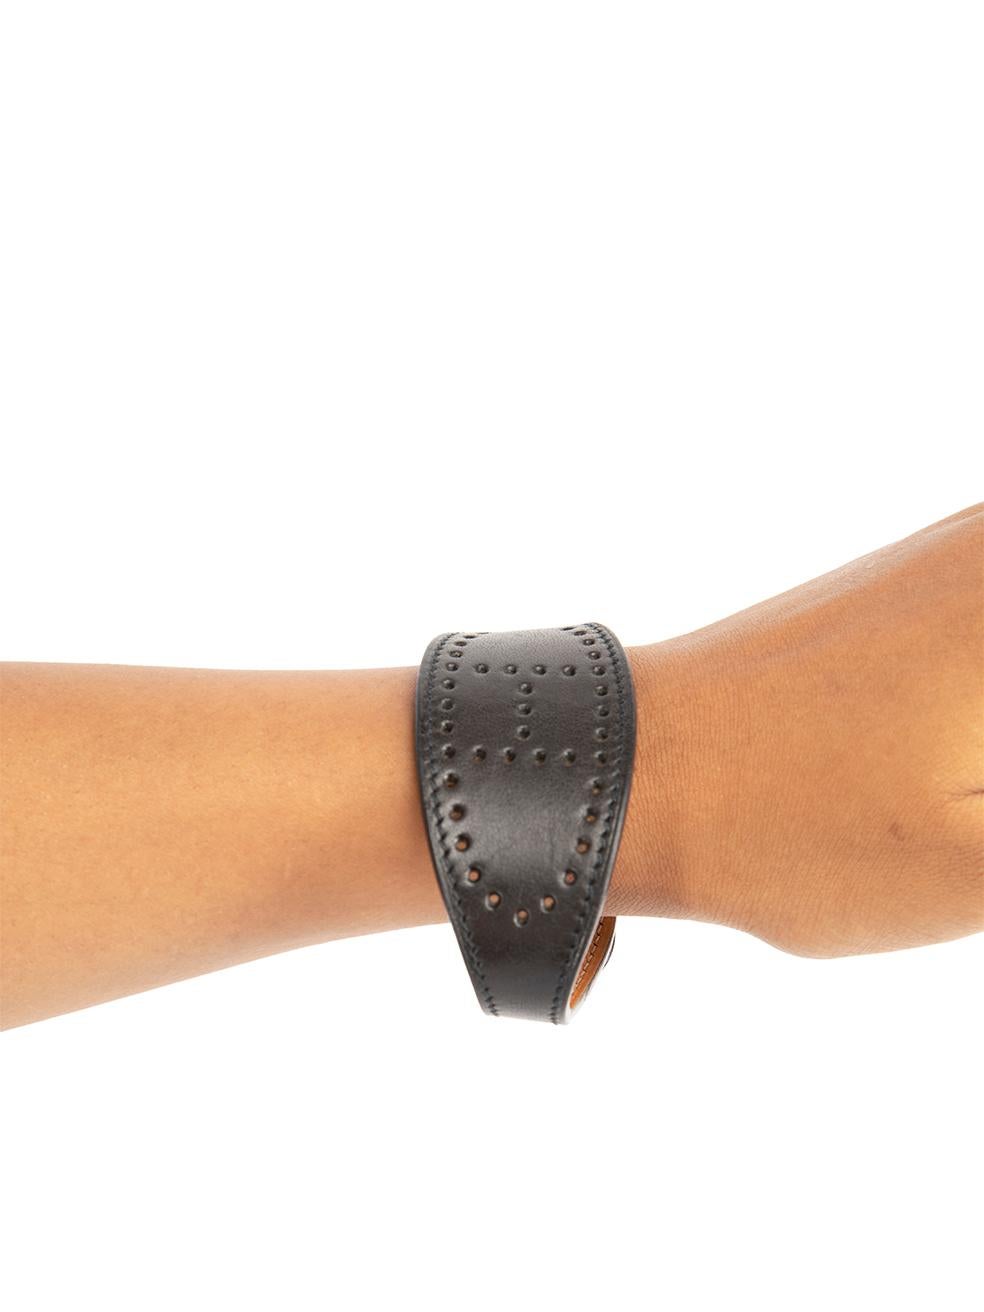 CONDITION is Very good. Minimal wear to bracelet is evident. Minimal wear to the leather underside with very light mark by the fastening on this used Hermès designer resale item.
  
  Details
  Evelyne
  Black
  Leather
  Bracelet
  Perforated logo